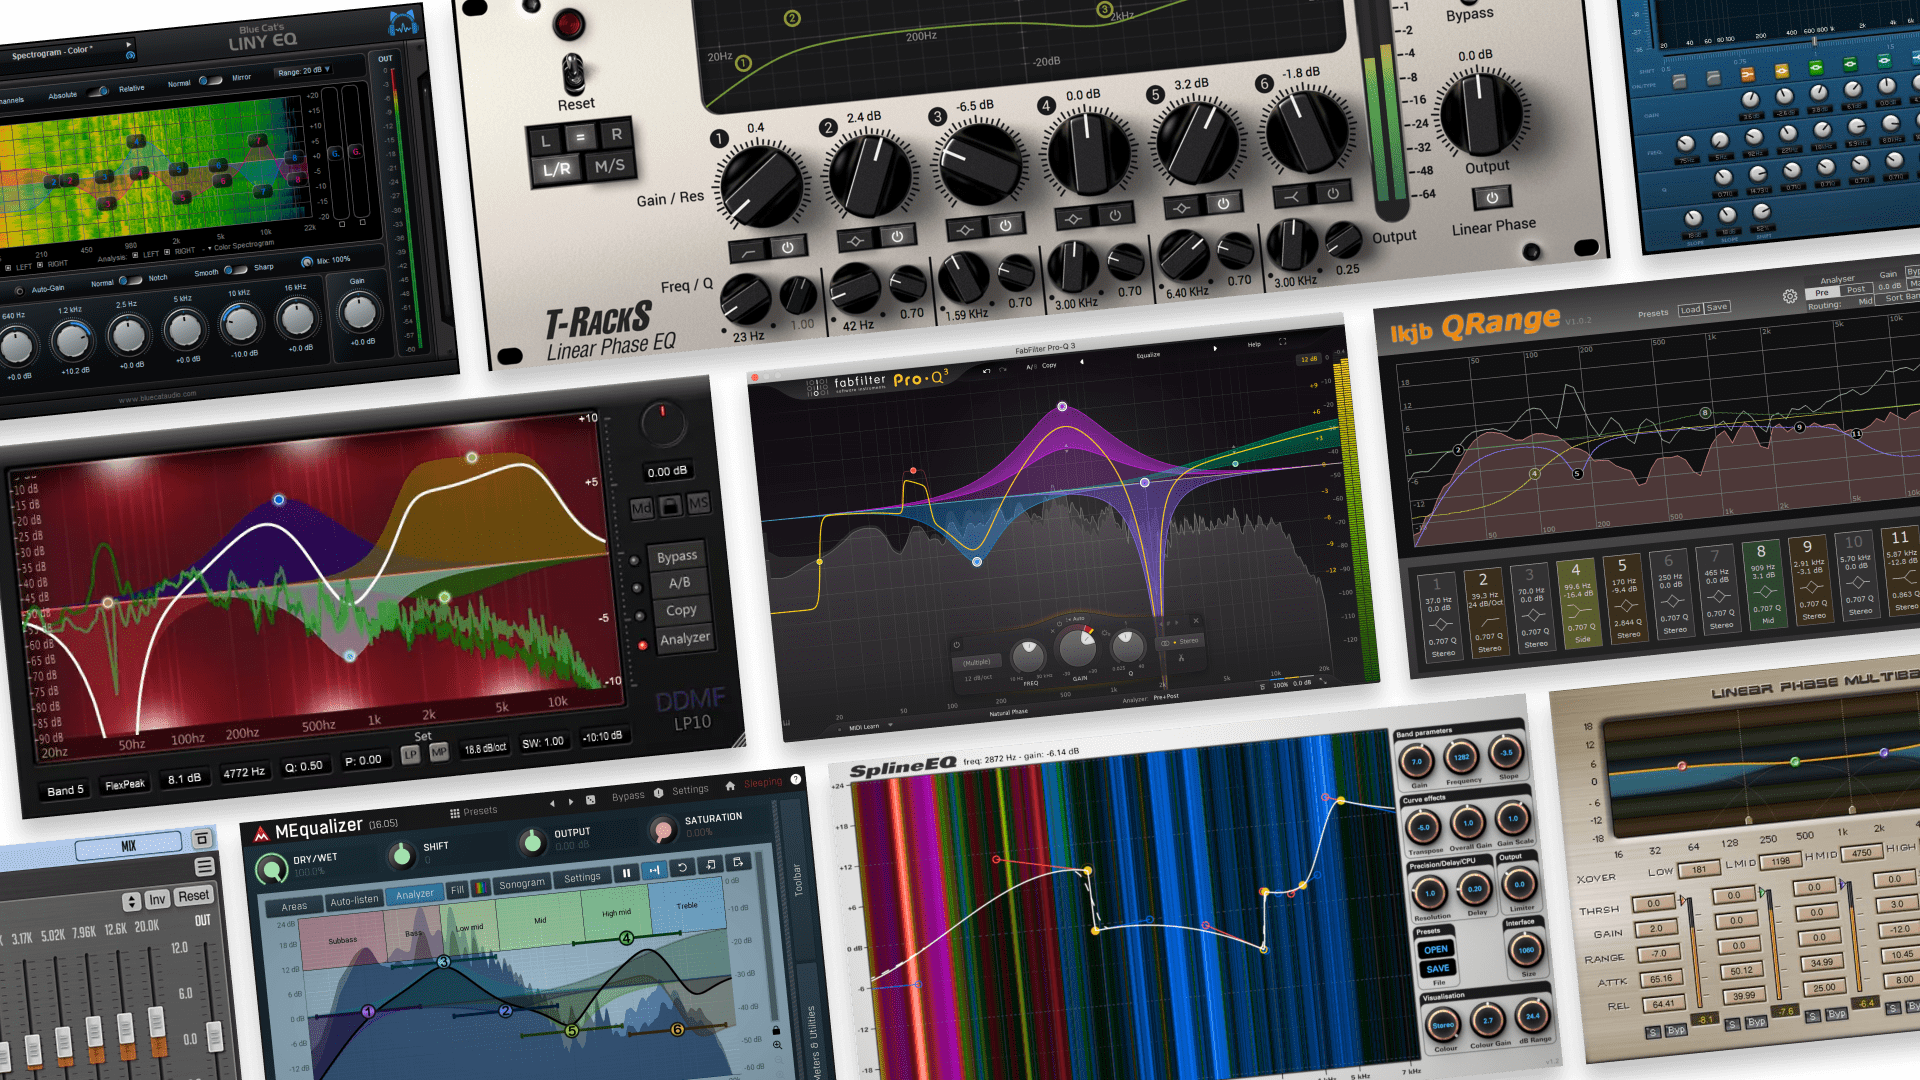 Read - <a href="https://blog.landr.com/linear-phase-eq/" target="_blank" rel="noopener">Linear Phase EQ: The 10 Best Plugins and How to Use Them</a>